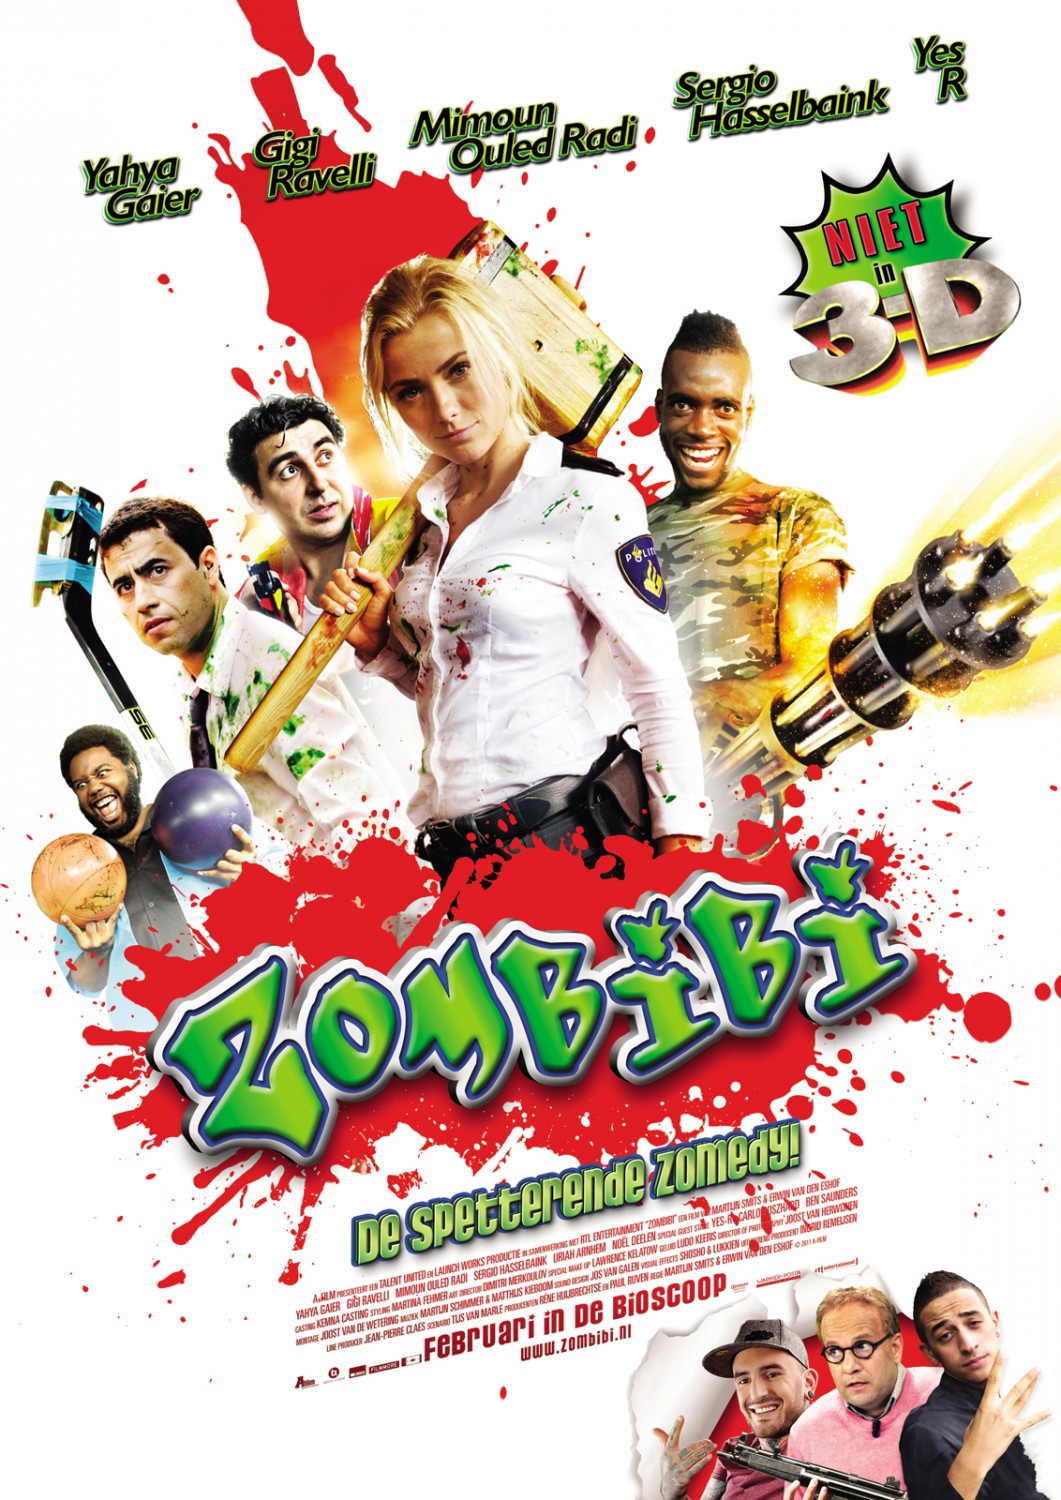 Extra Large Movie Poster Image for Zombibi (#1 of 2)